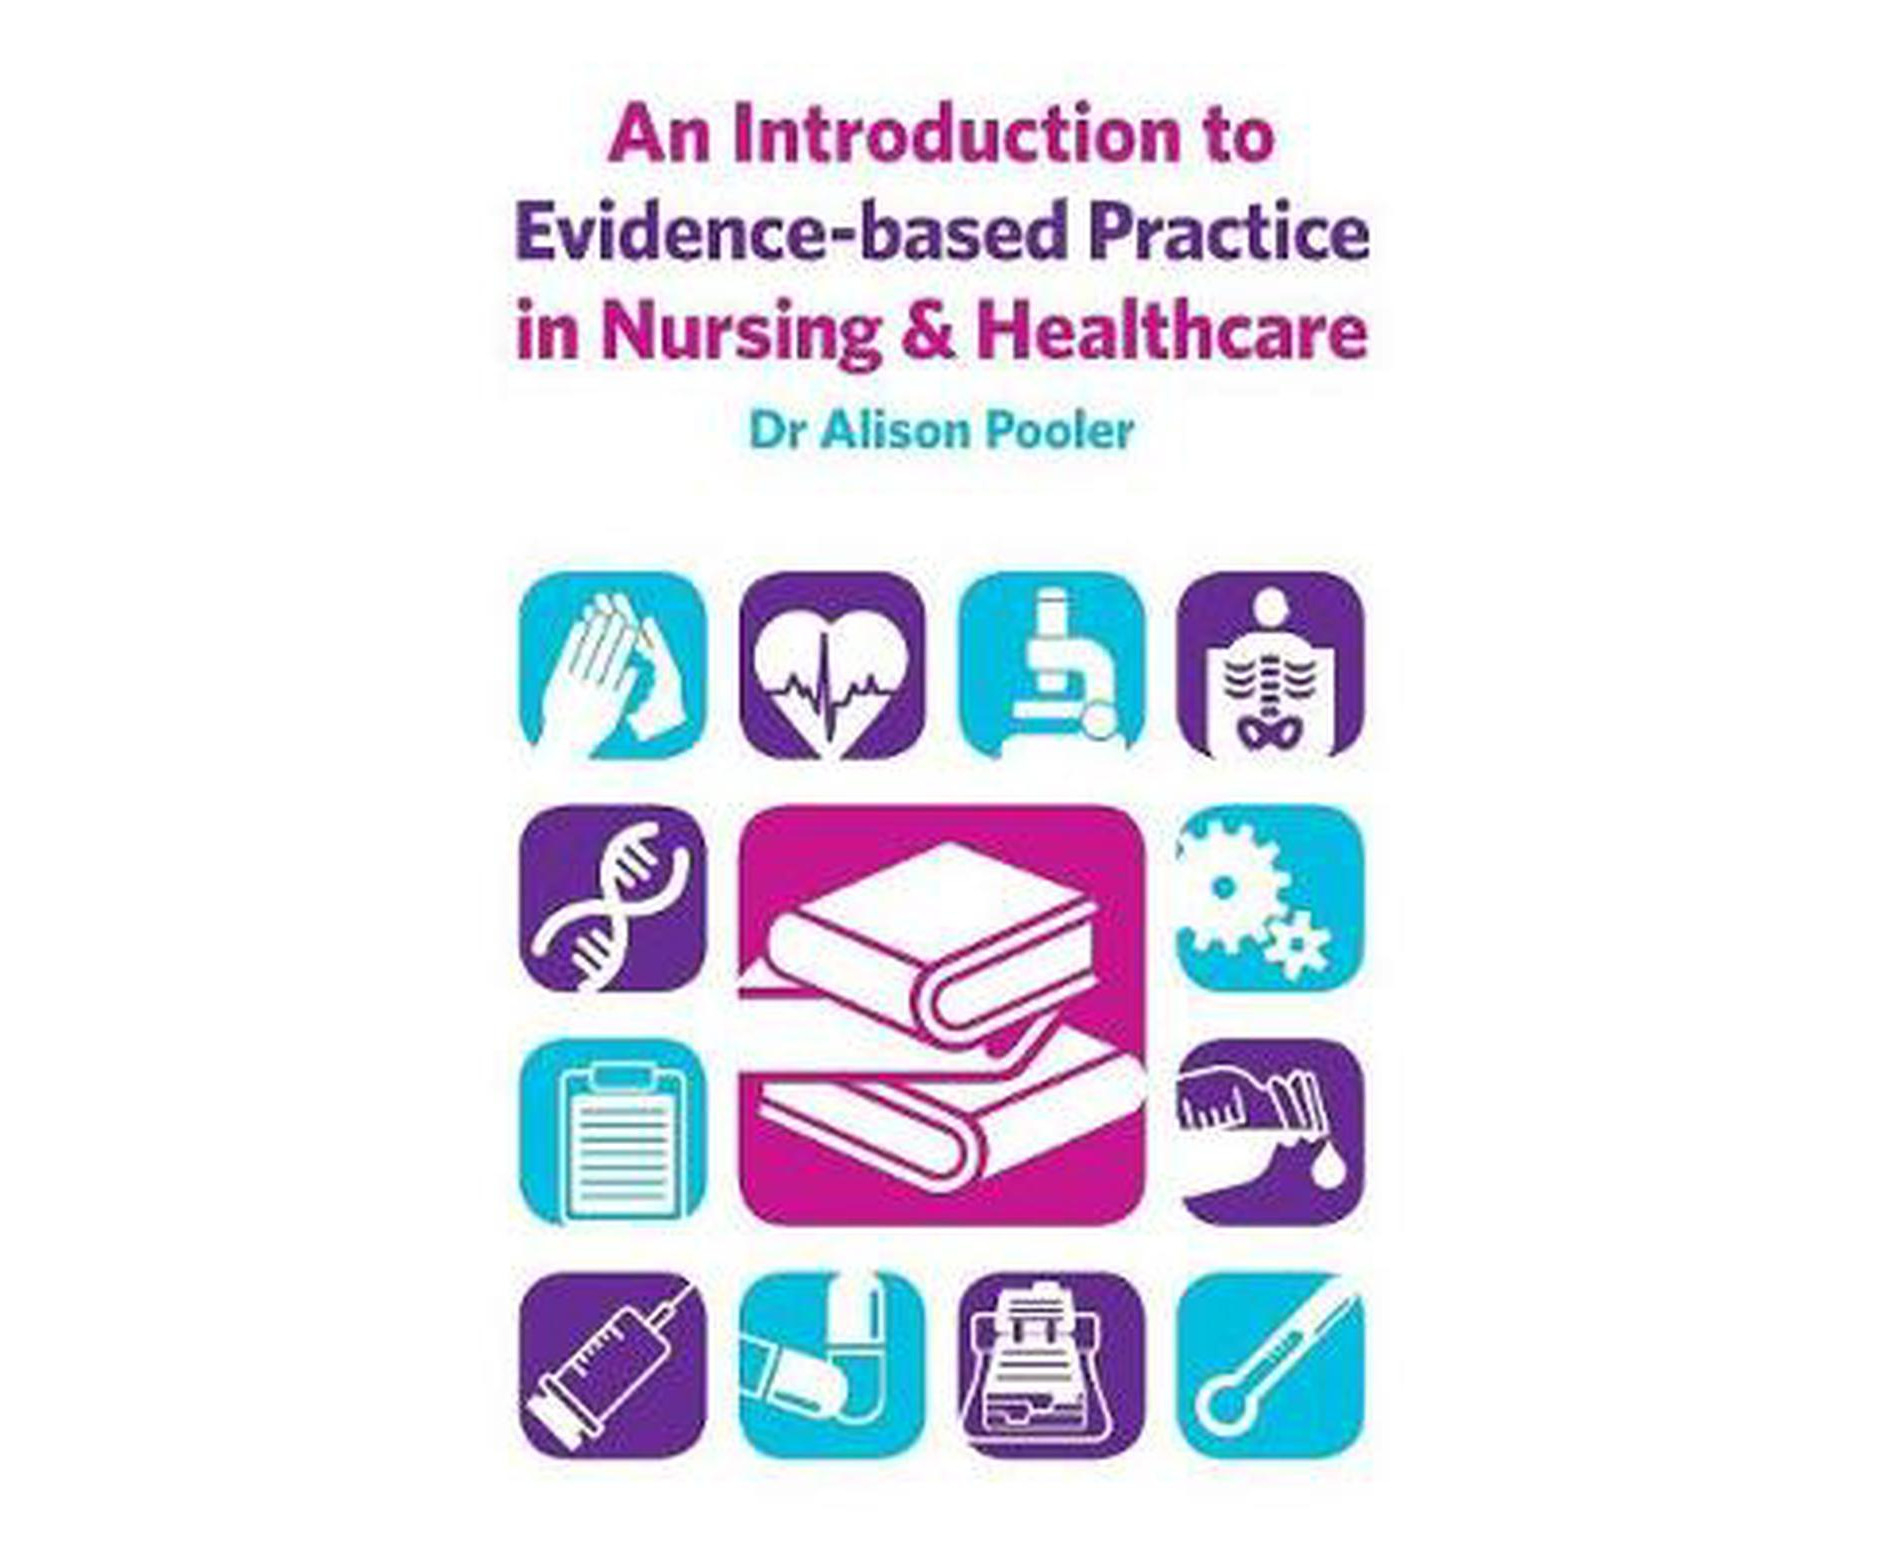 in　Nursing　to　Practice　Evidence-based　Introduction　Healthcare